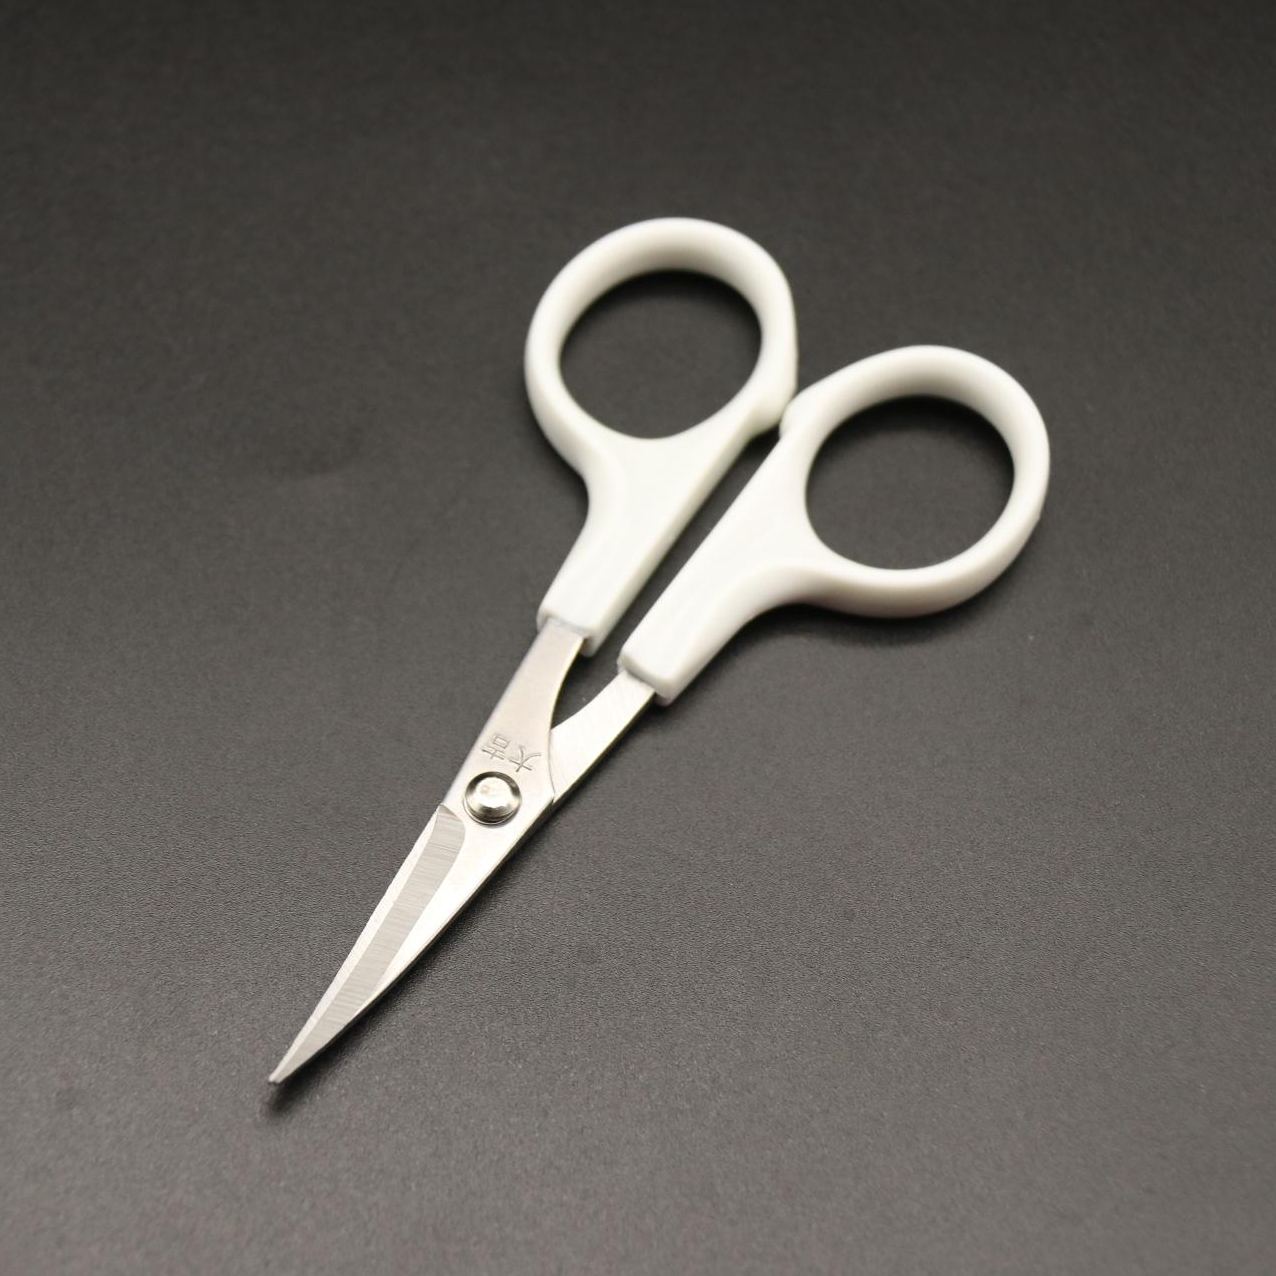 Curved Blade Embroidery Scissors Plastic For Thread Cutting